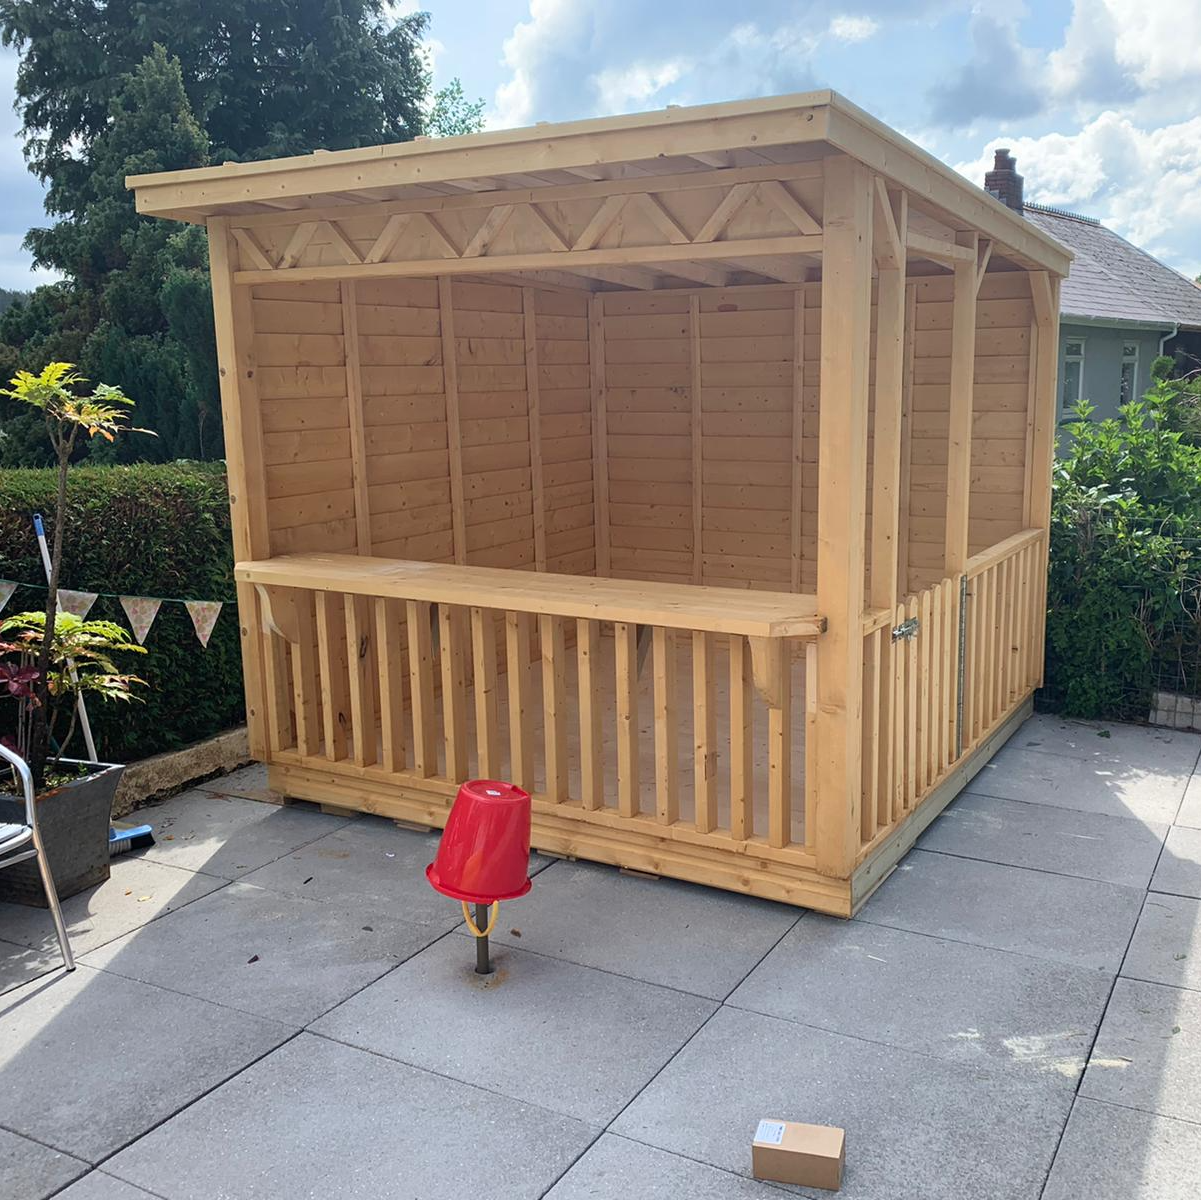 Pent style gazebo in the style required by the customer to suit their needs.